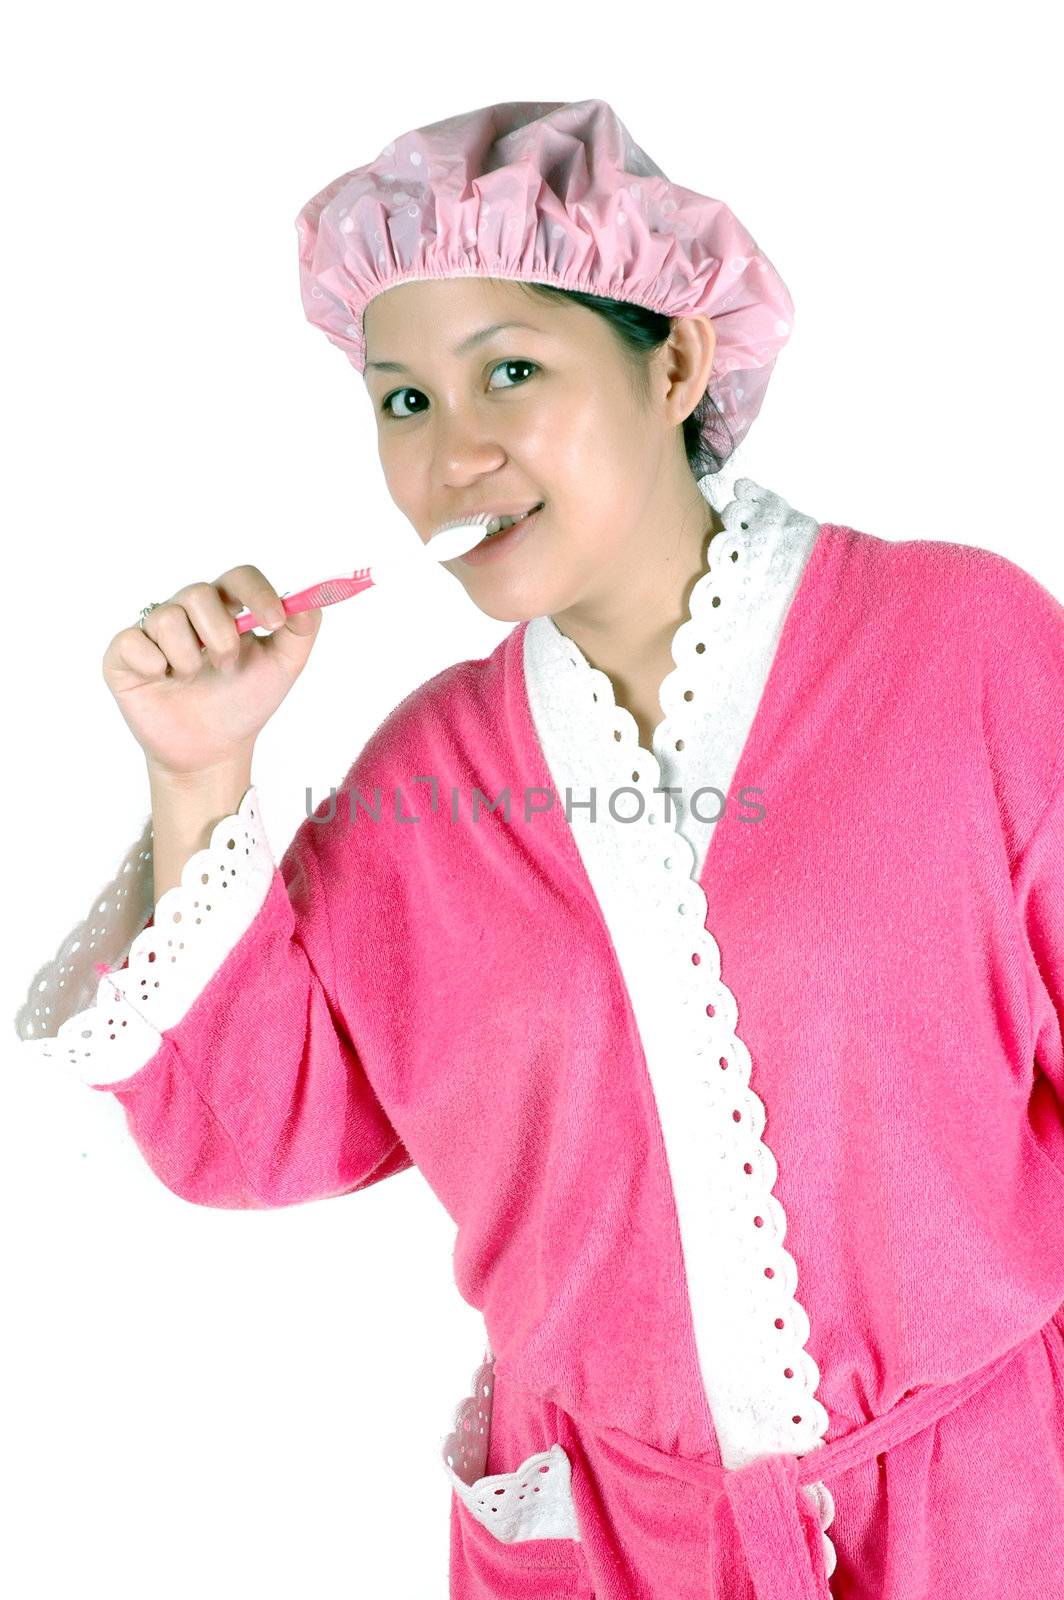 young woman brushing her teeth isolated on white background